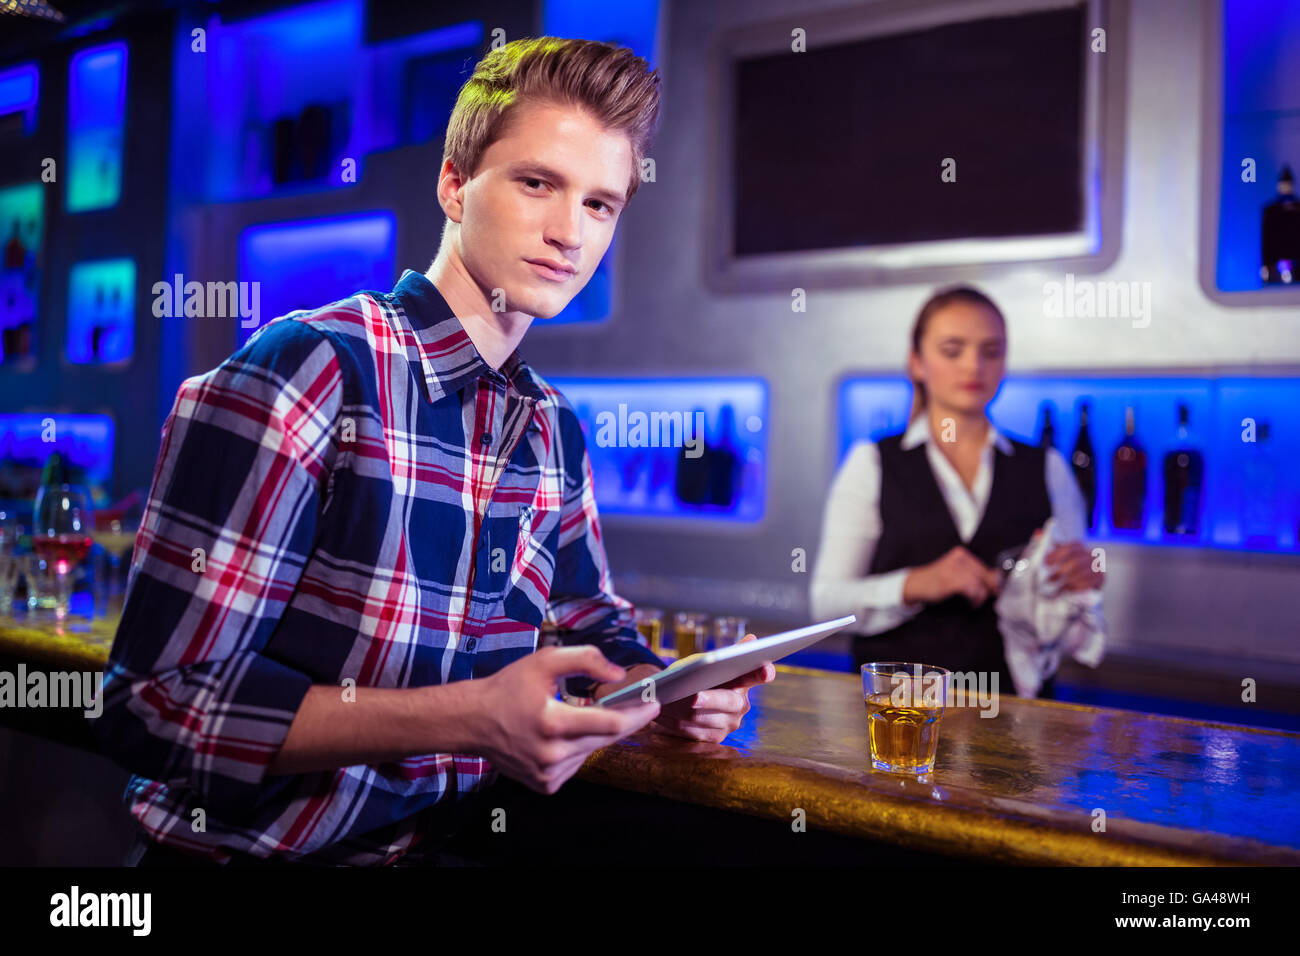 Portrait of man using digital tablet with bartender working Stock Photo